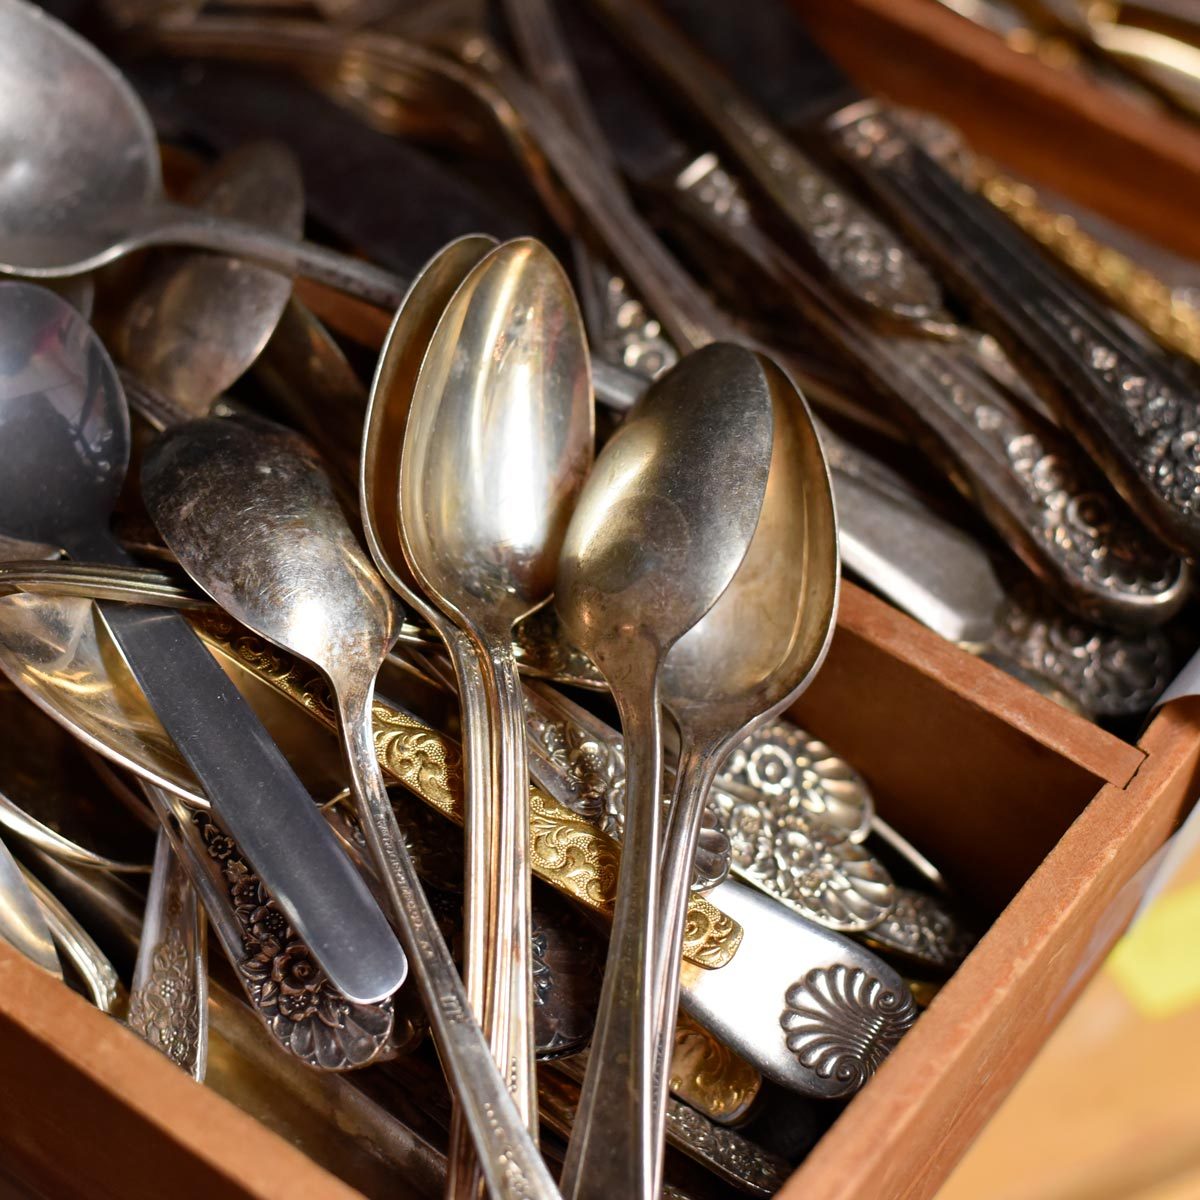 How to Clean Silver Plate (Everyday & Deep Cleaning) - Bob Vila